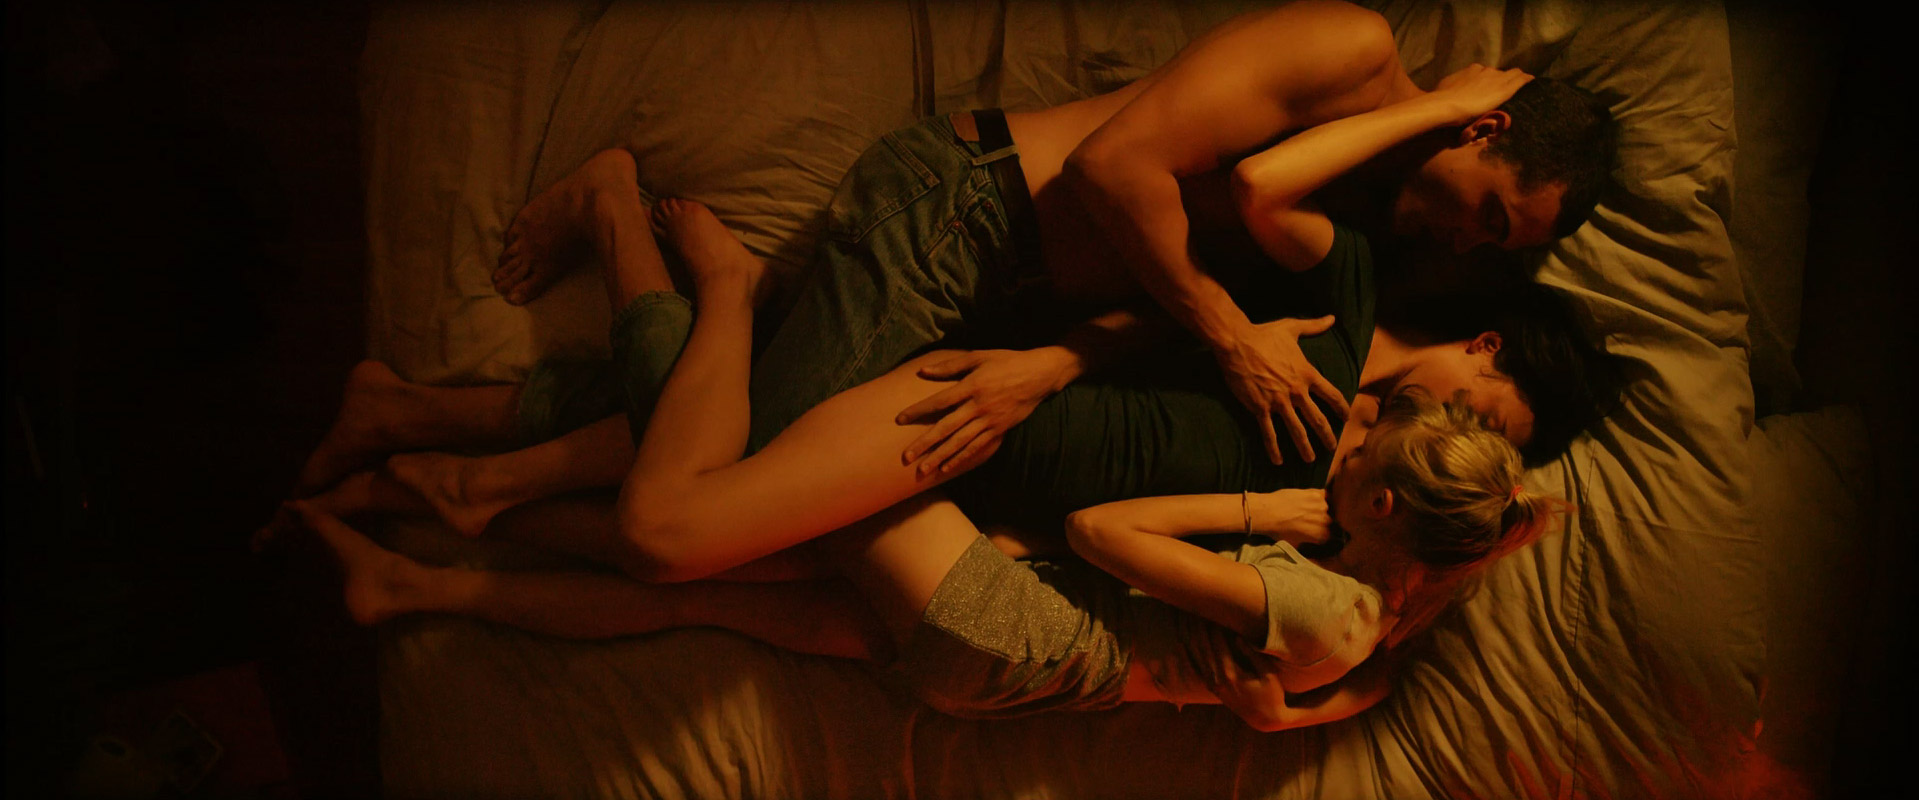 Now and later threesome scene